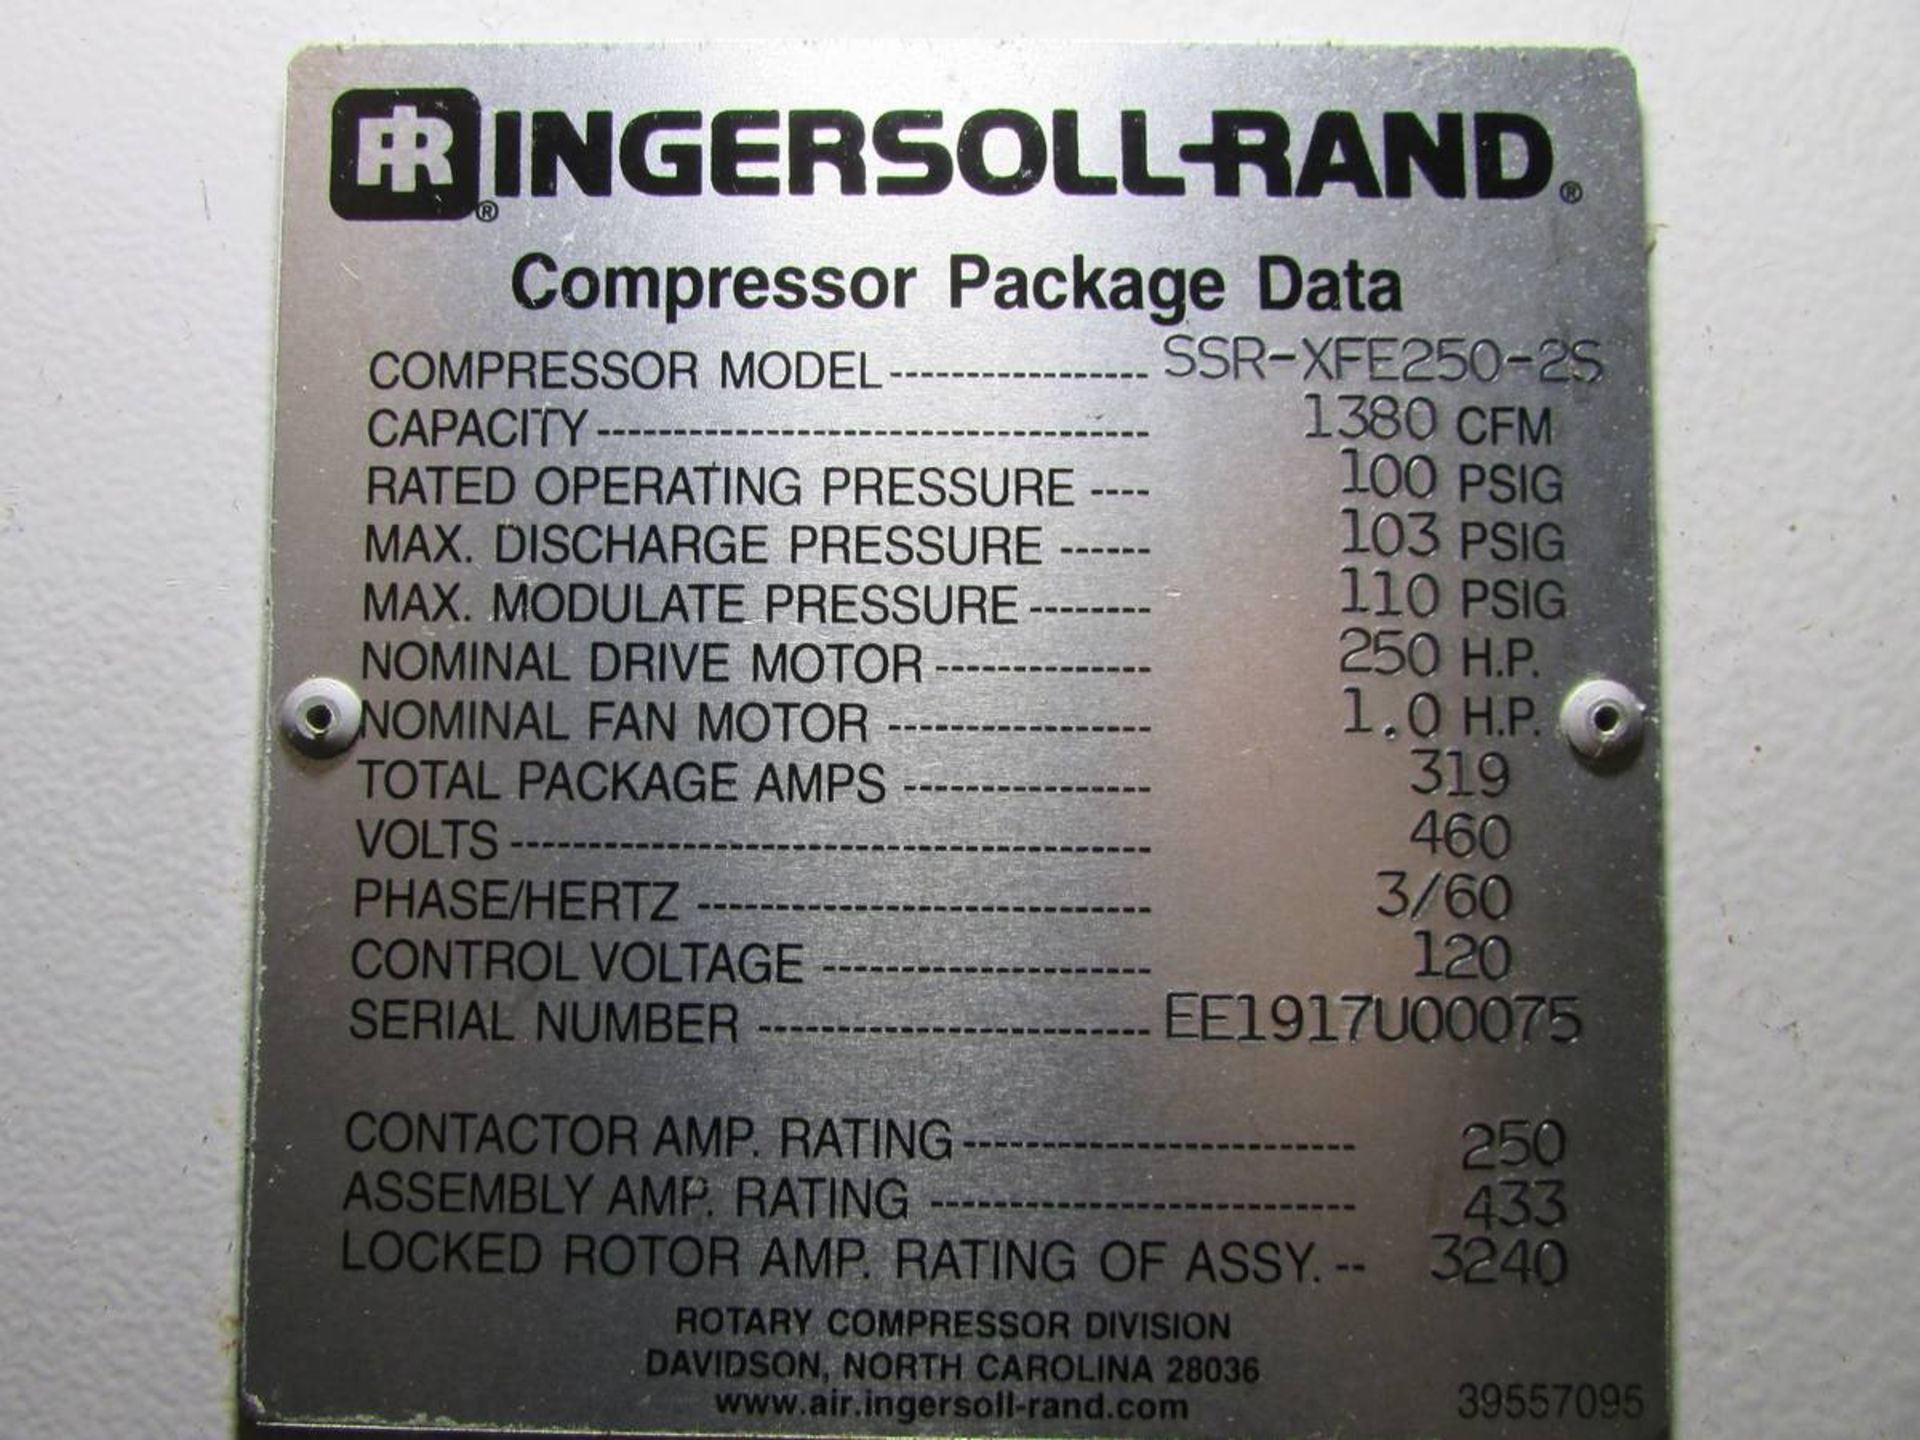 Ingersoll Rand SSR-XFE250-2S 250 HP Rotary Screw Air Compressor - Image 13 of 13